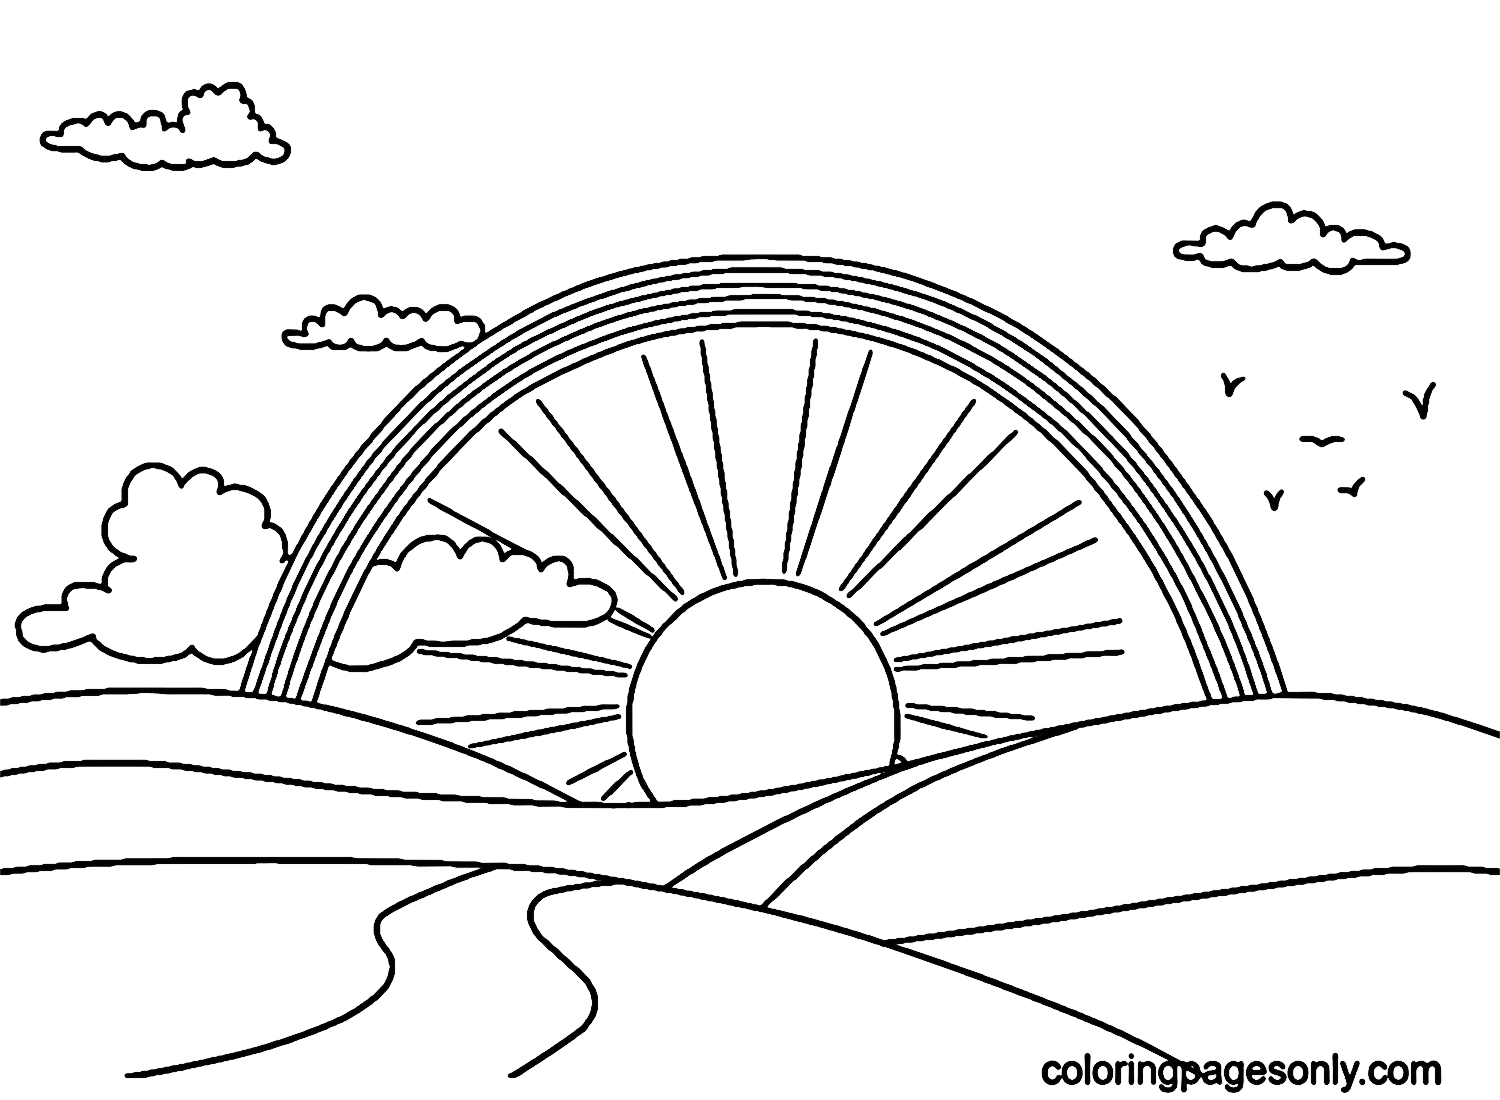 Rainbows, Sun, Paths and Clouds Coloring Pages